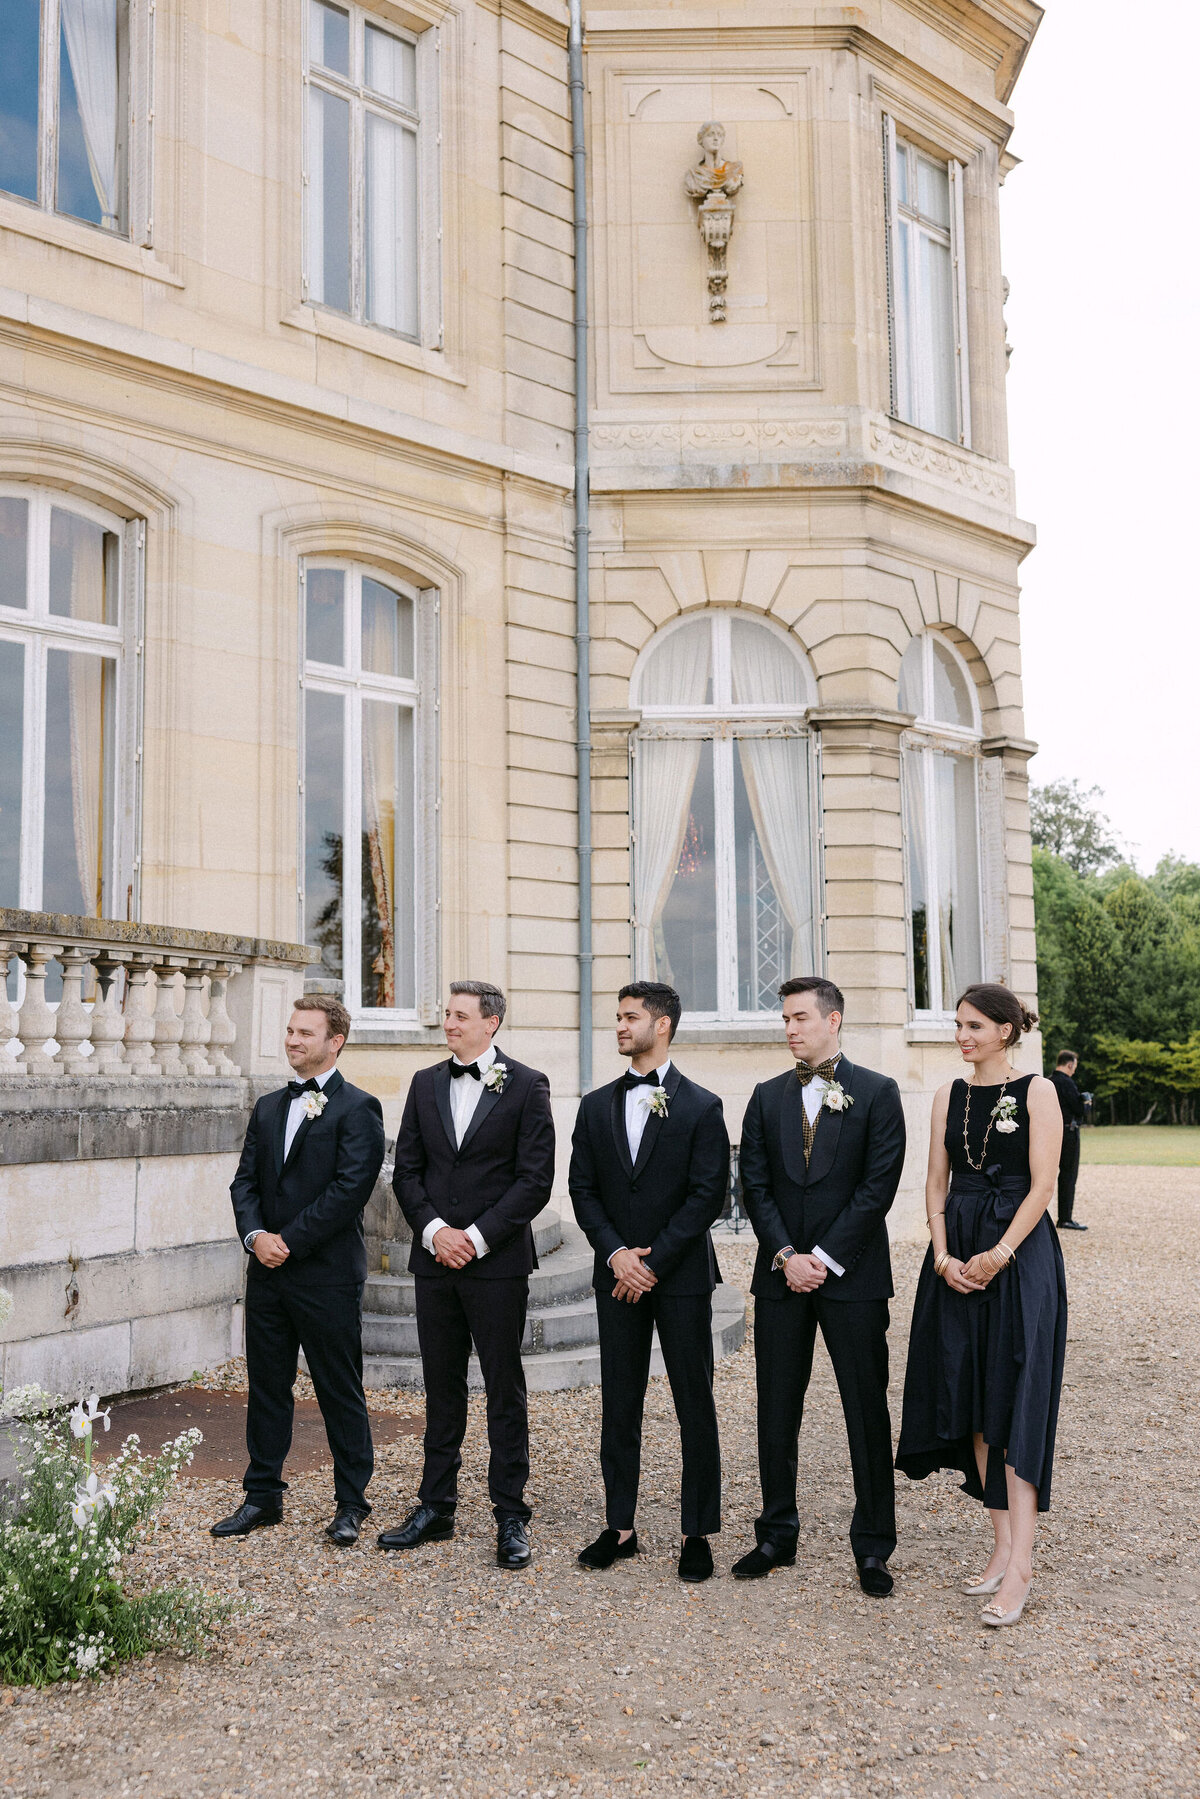 Jennifer Fox Weddings English speaking wedding planning & design agency in France crafting refined and bespoke weddings and celebrations Provence, Paris and destination 302